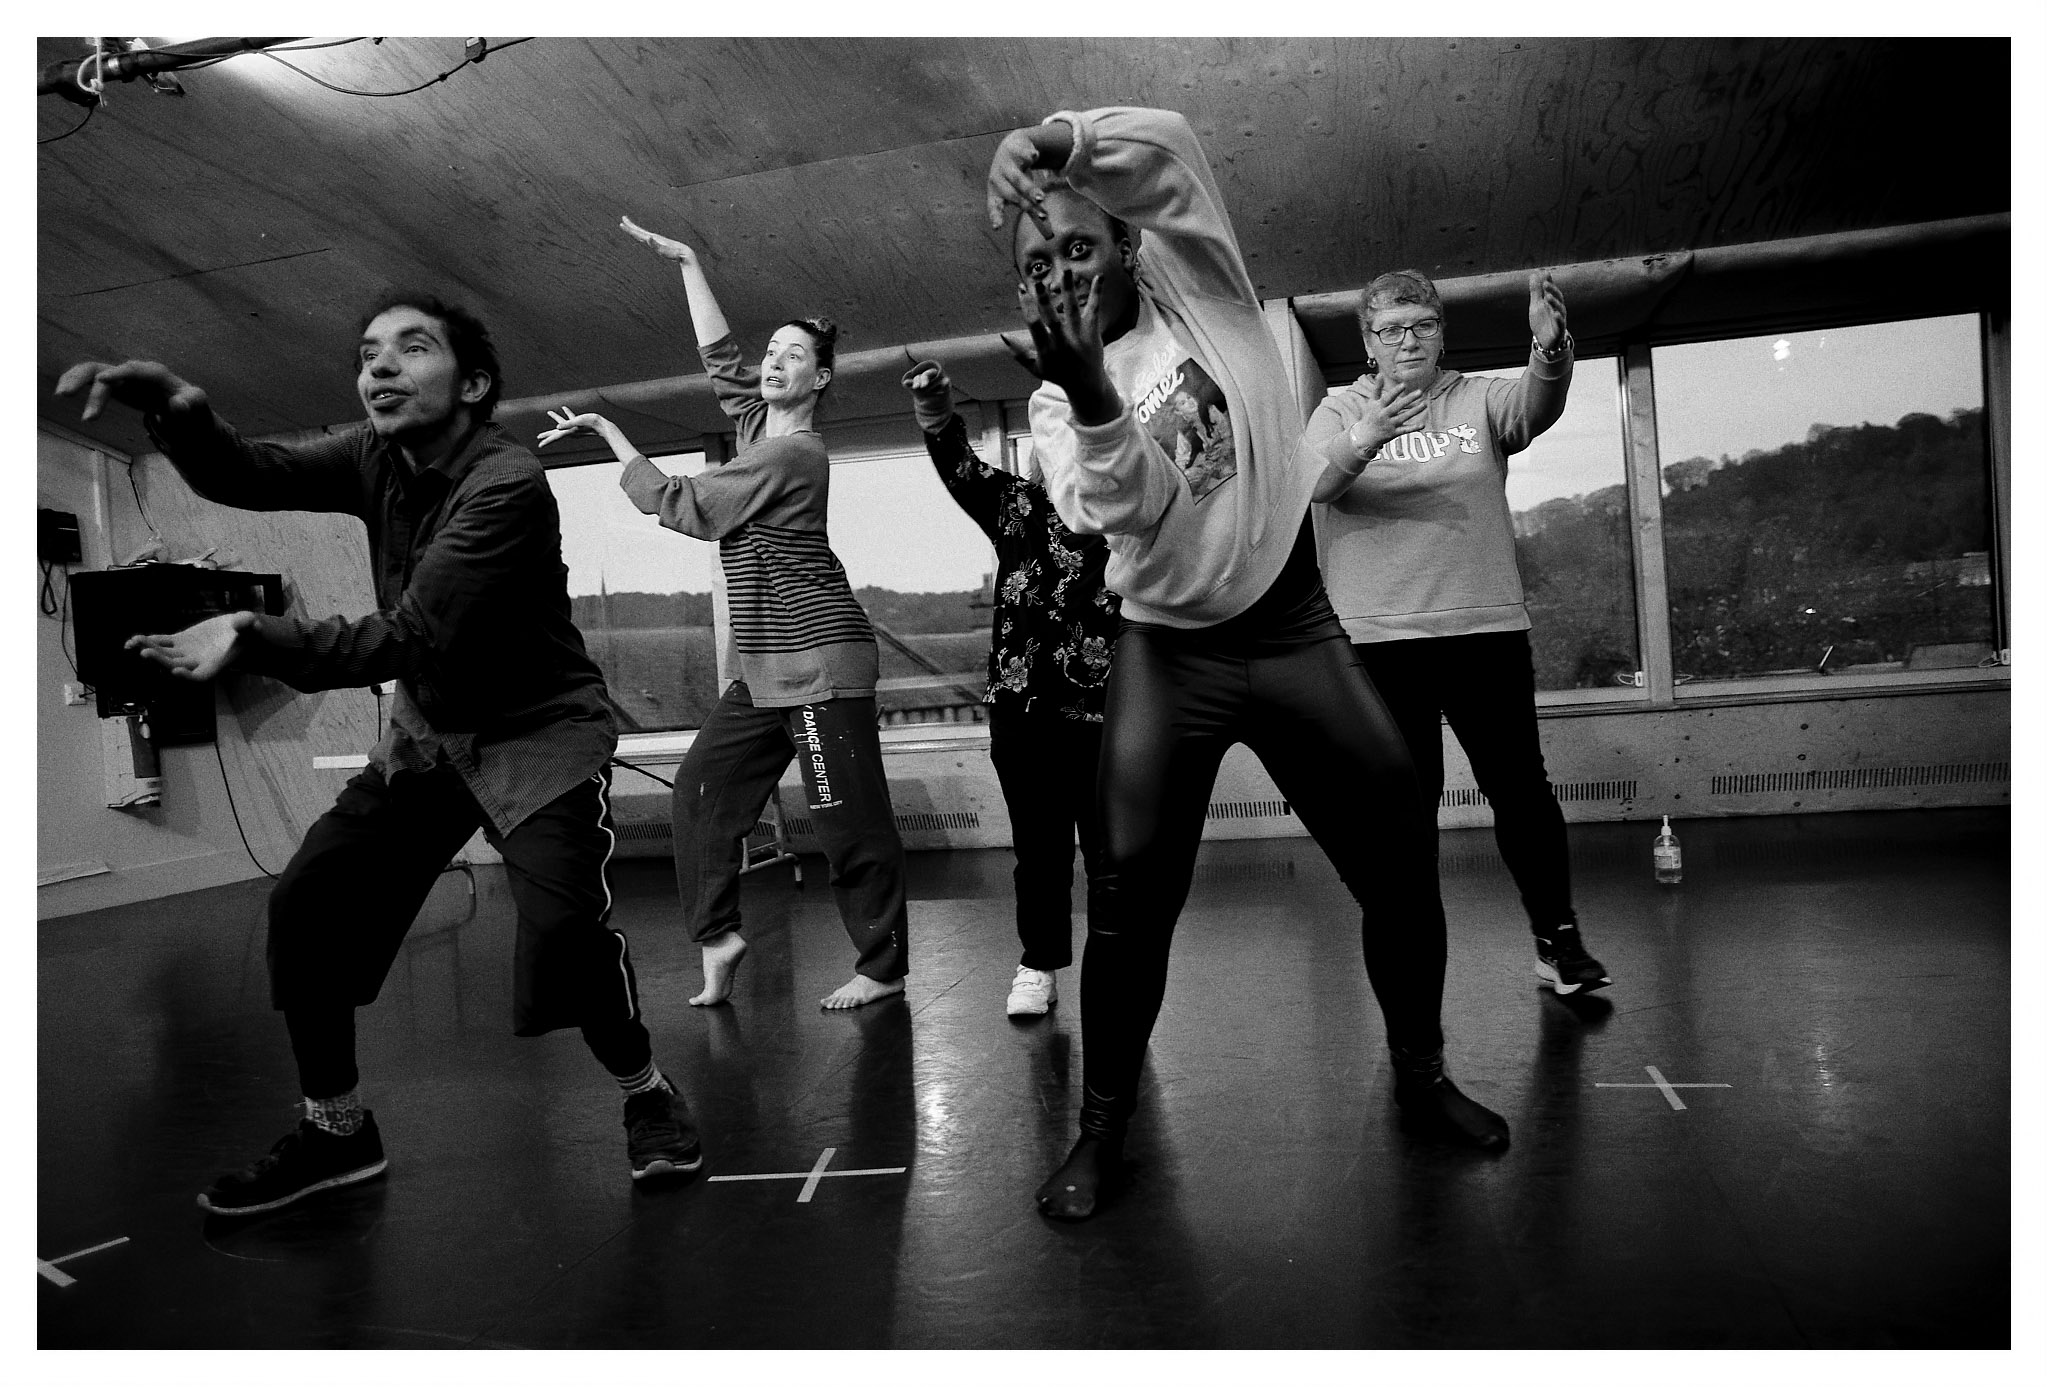 Corali dancers in rehearsals for performance of Super Hot Hot Dog at Theatre Royal, Bath